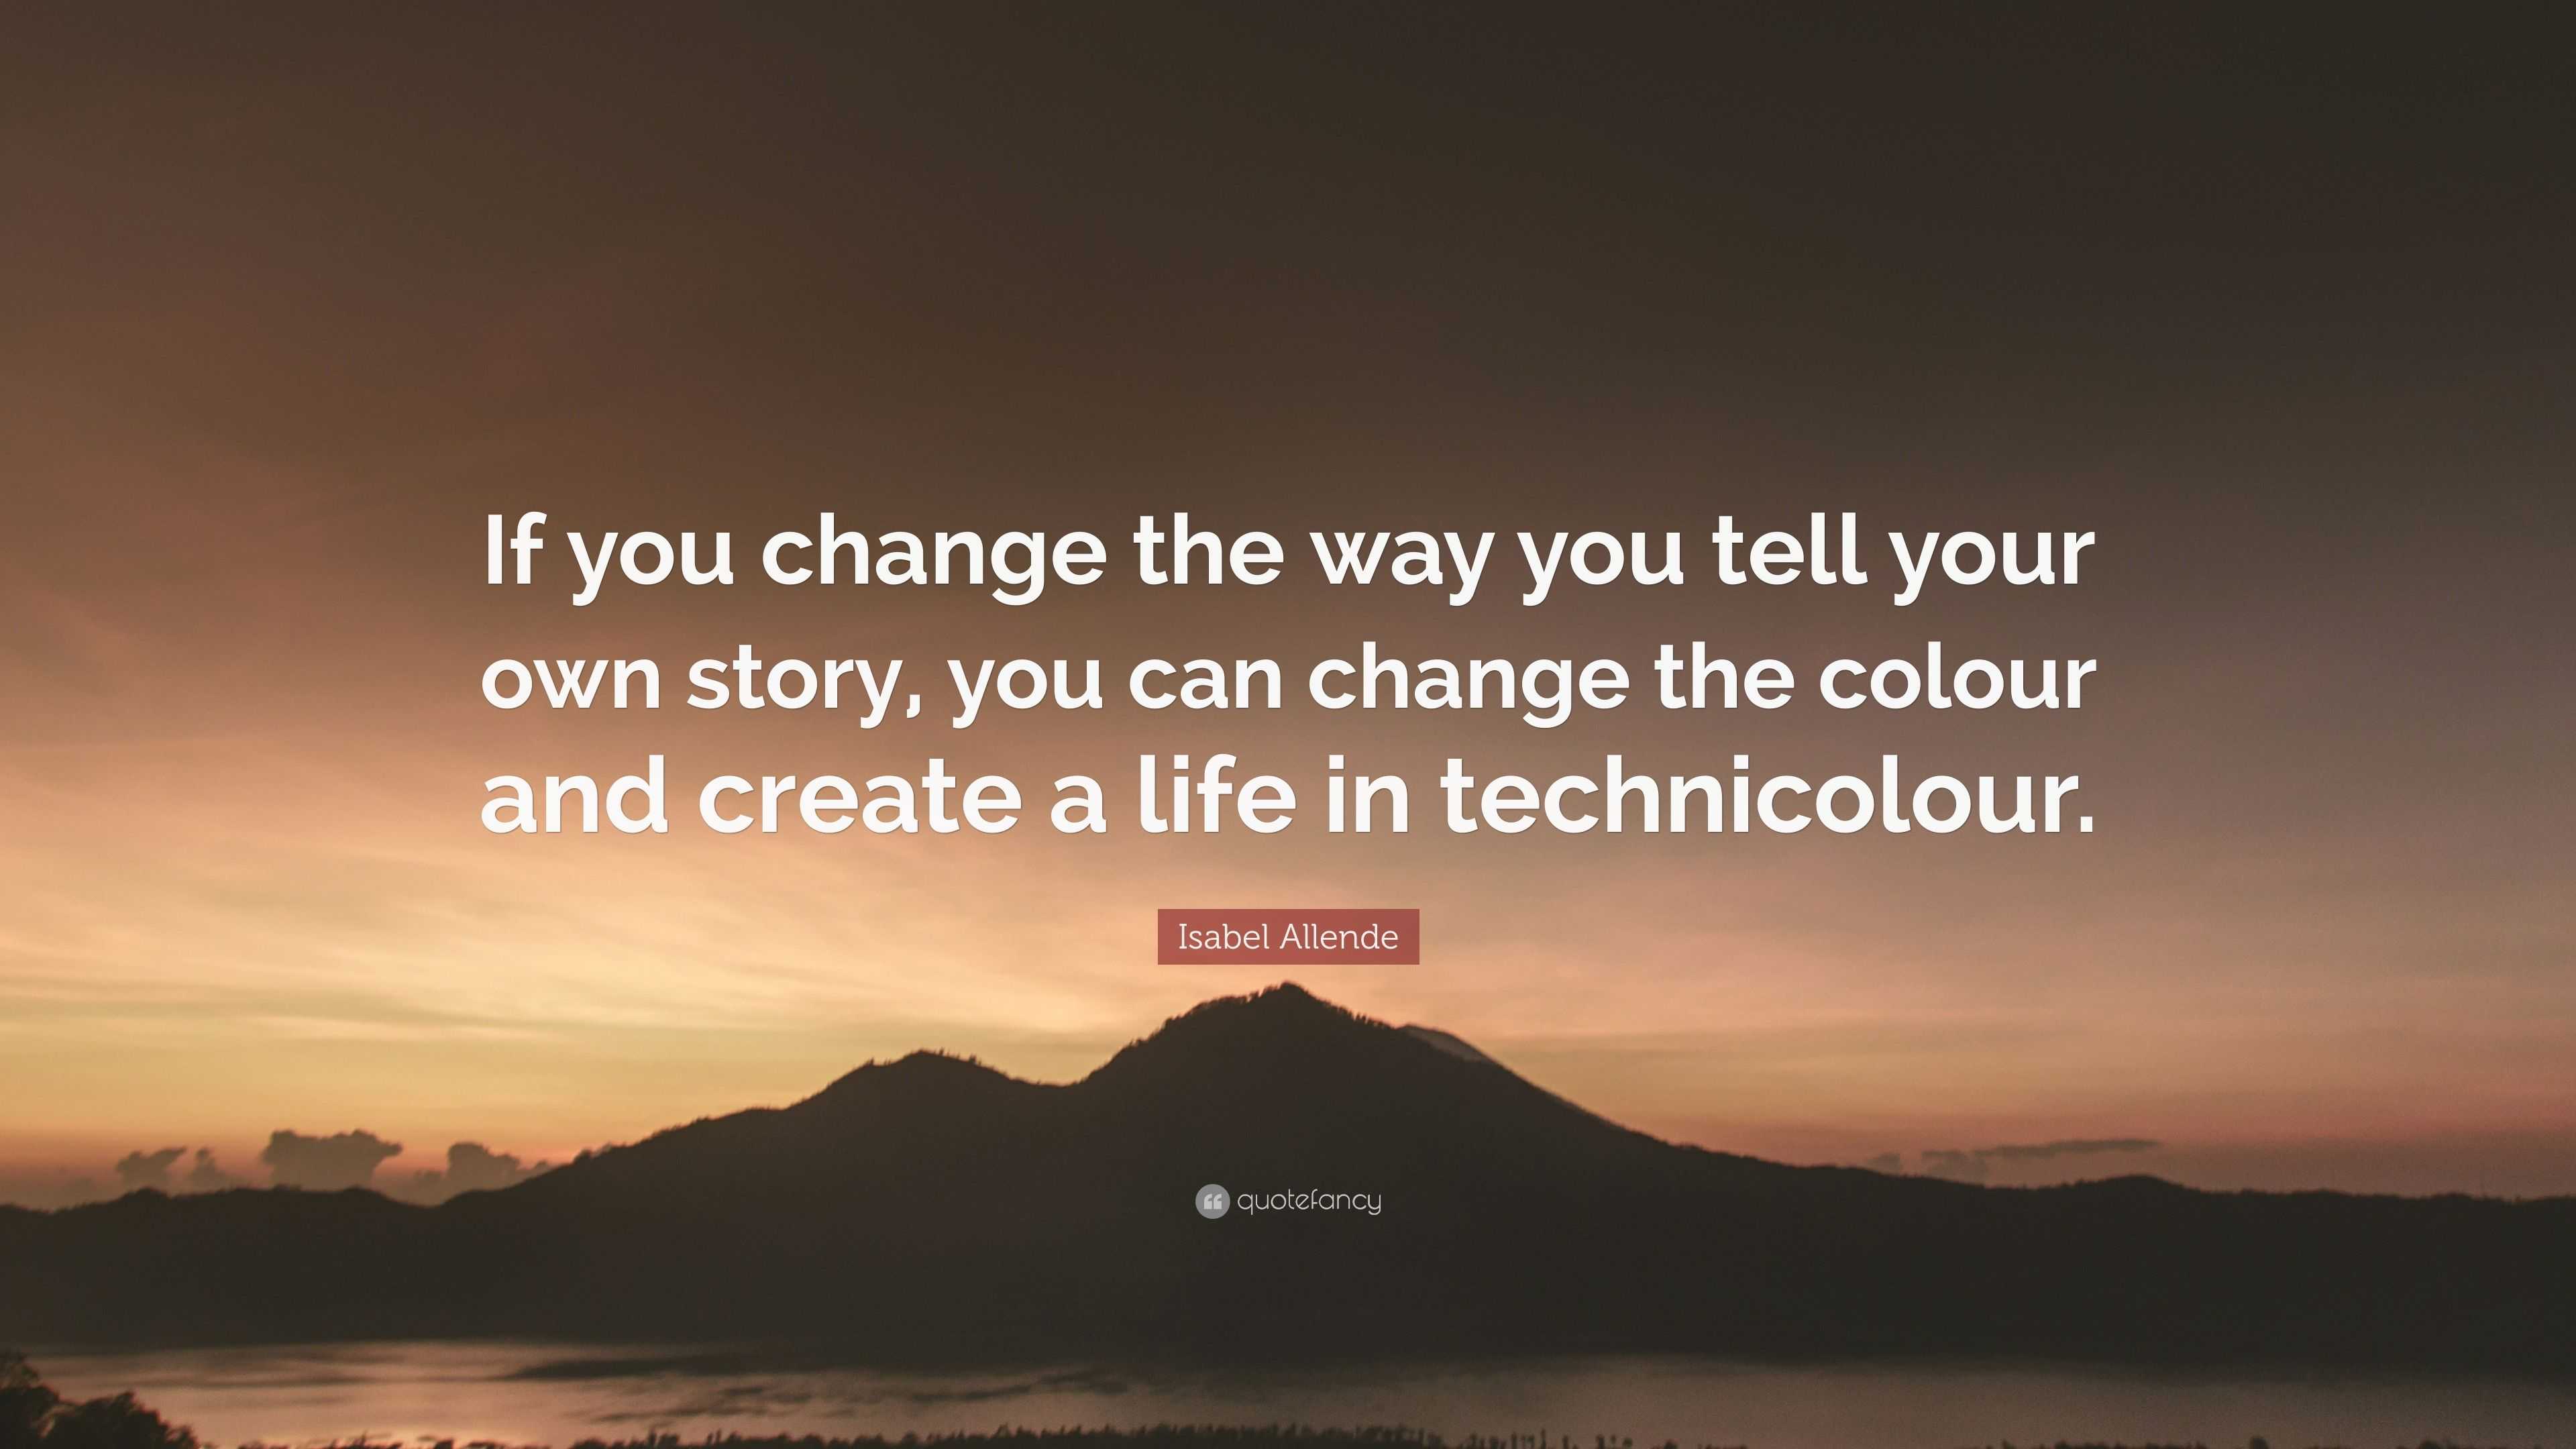 Isabel Allende Quote If You Change The Way You Tell Your Own Story You Can Change